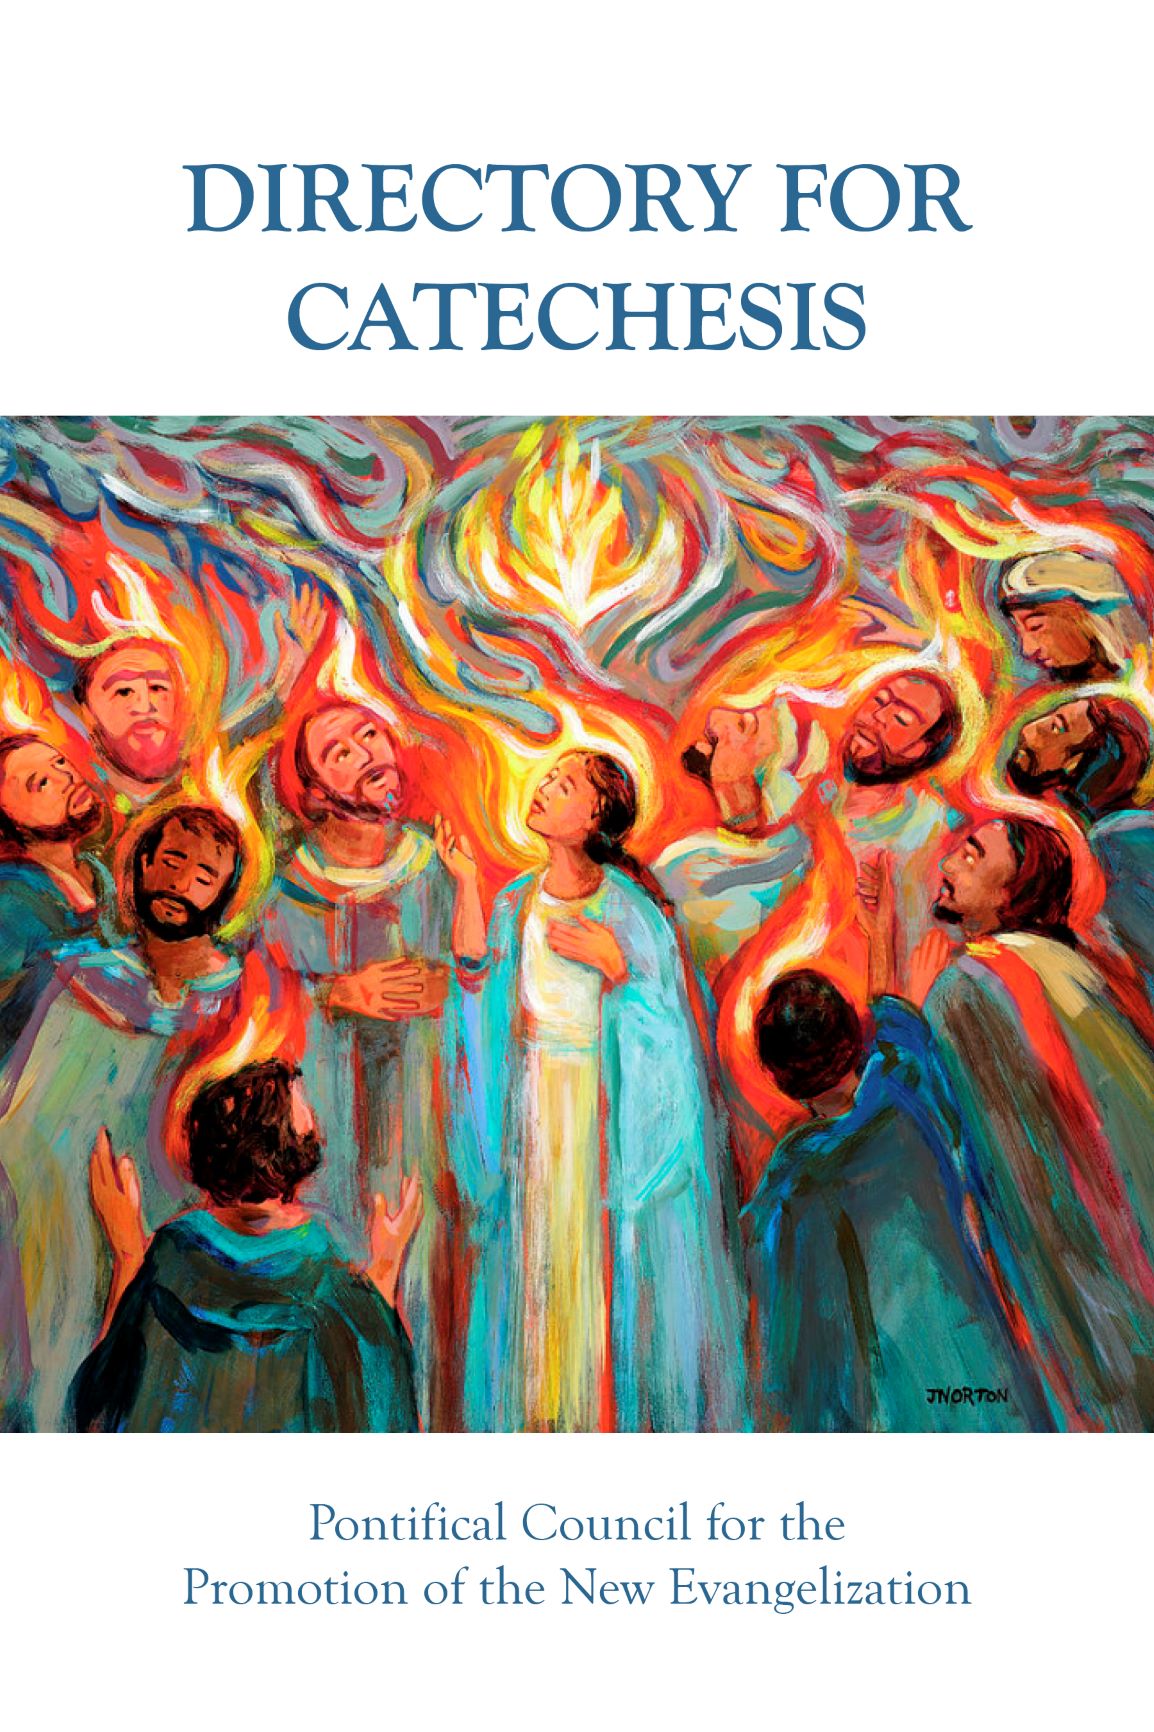 new directory for catechesis 2020 pdf download